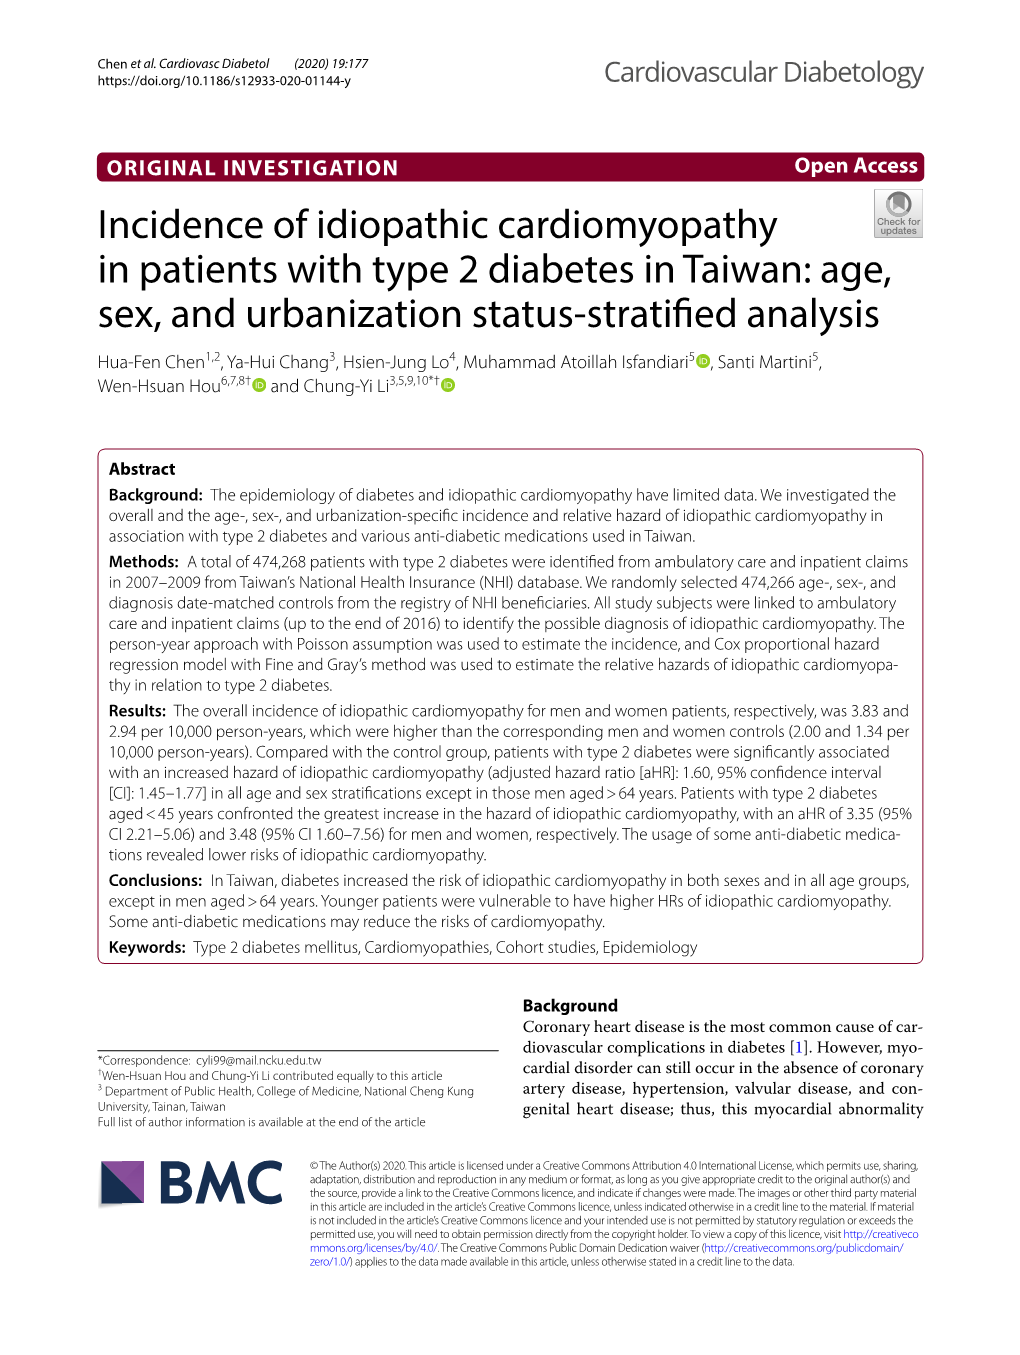 Incidence of Idiopathic Cardiomyopathy in Patients With